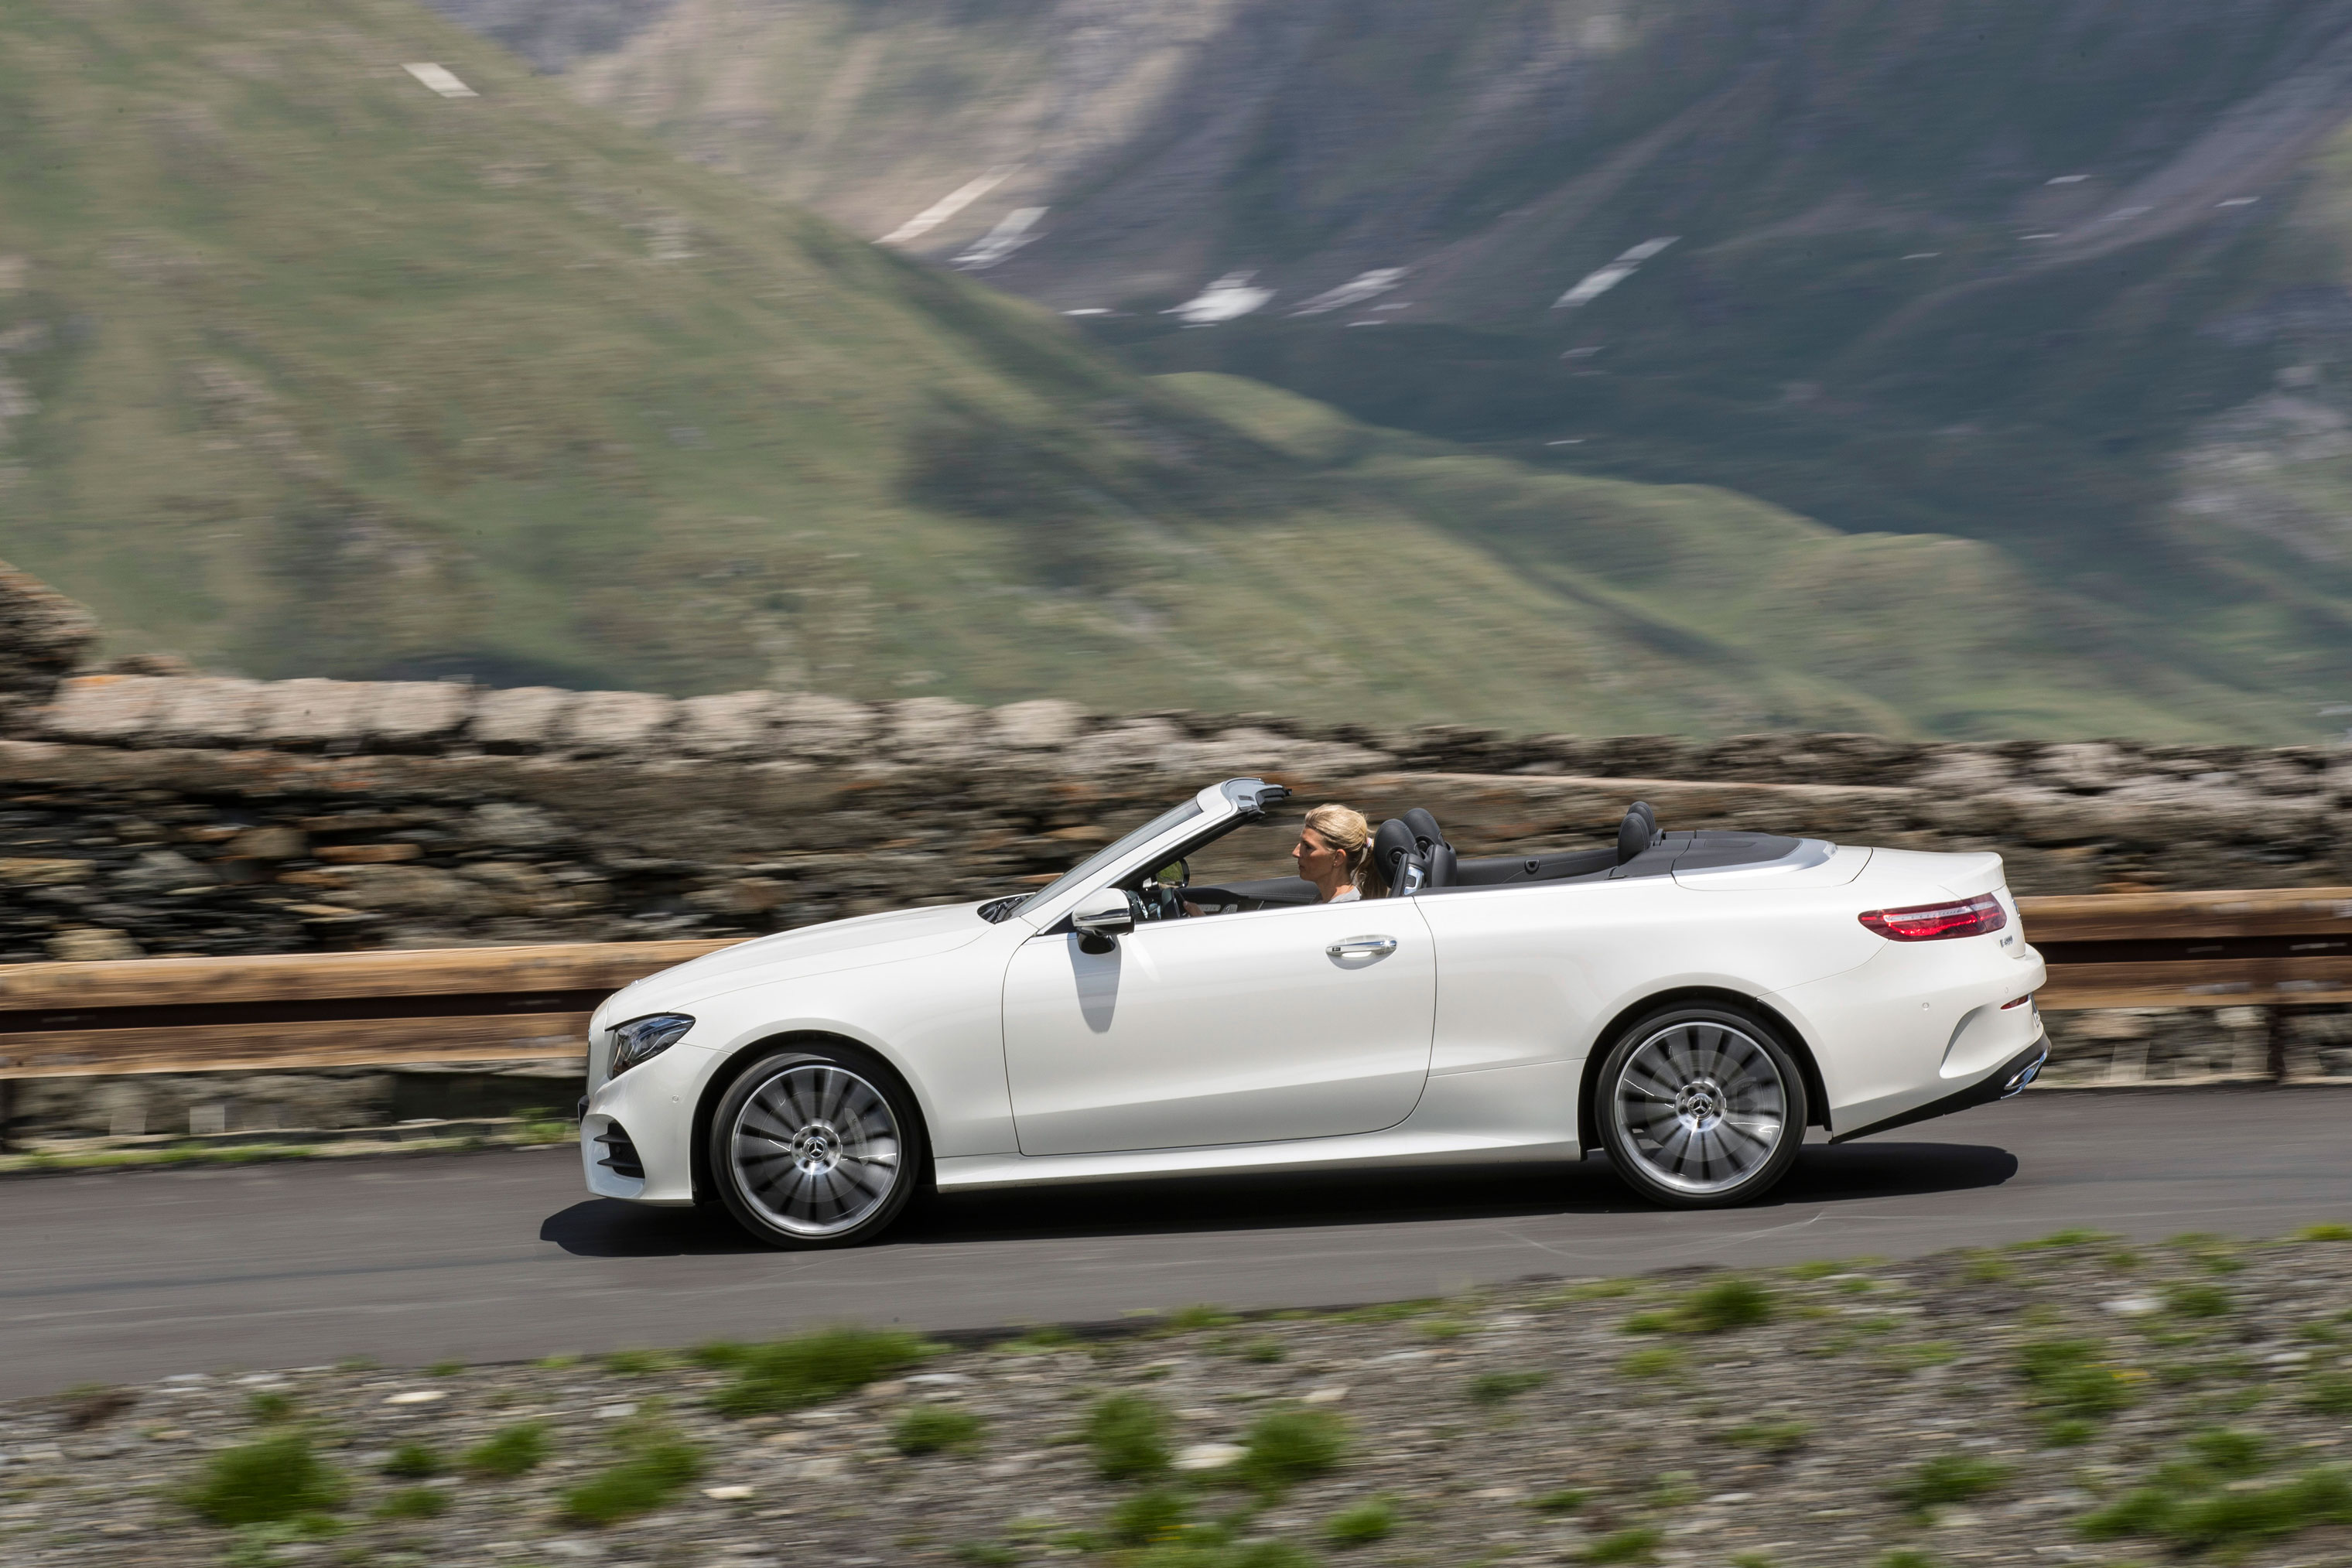 Mercedes-Benz E 400 4Matic Cabriolet Amg Styling Wallpapers